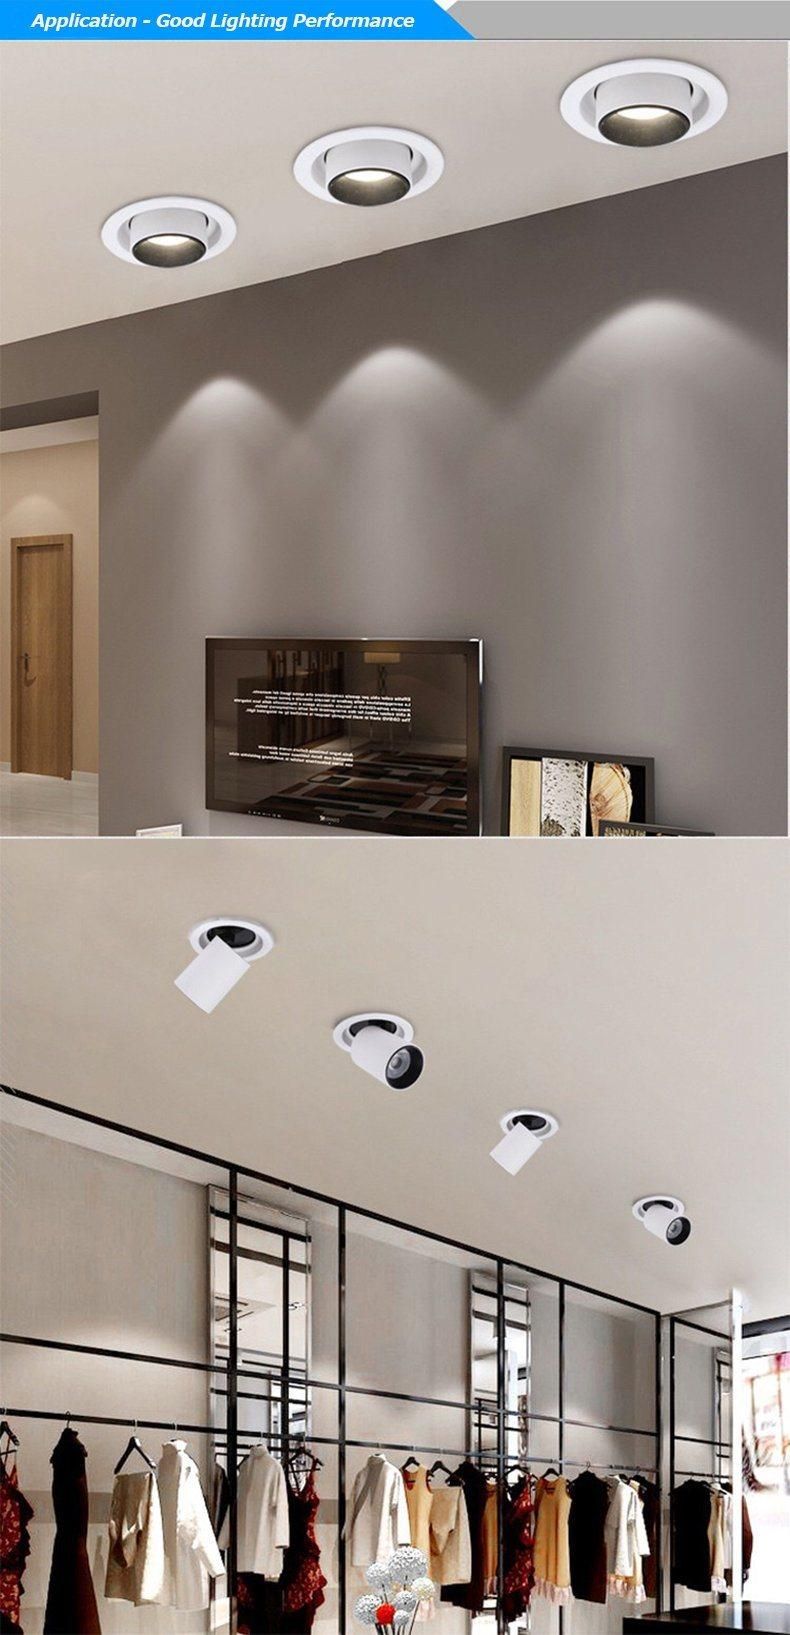 Double Head Square Anti Glare Recessed COB LED Spot Light Downlight with 360degress Adjust for Office Shop Store